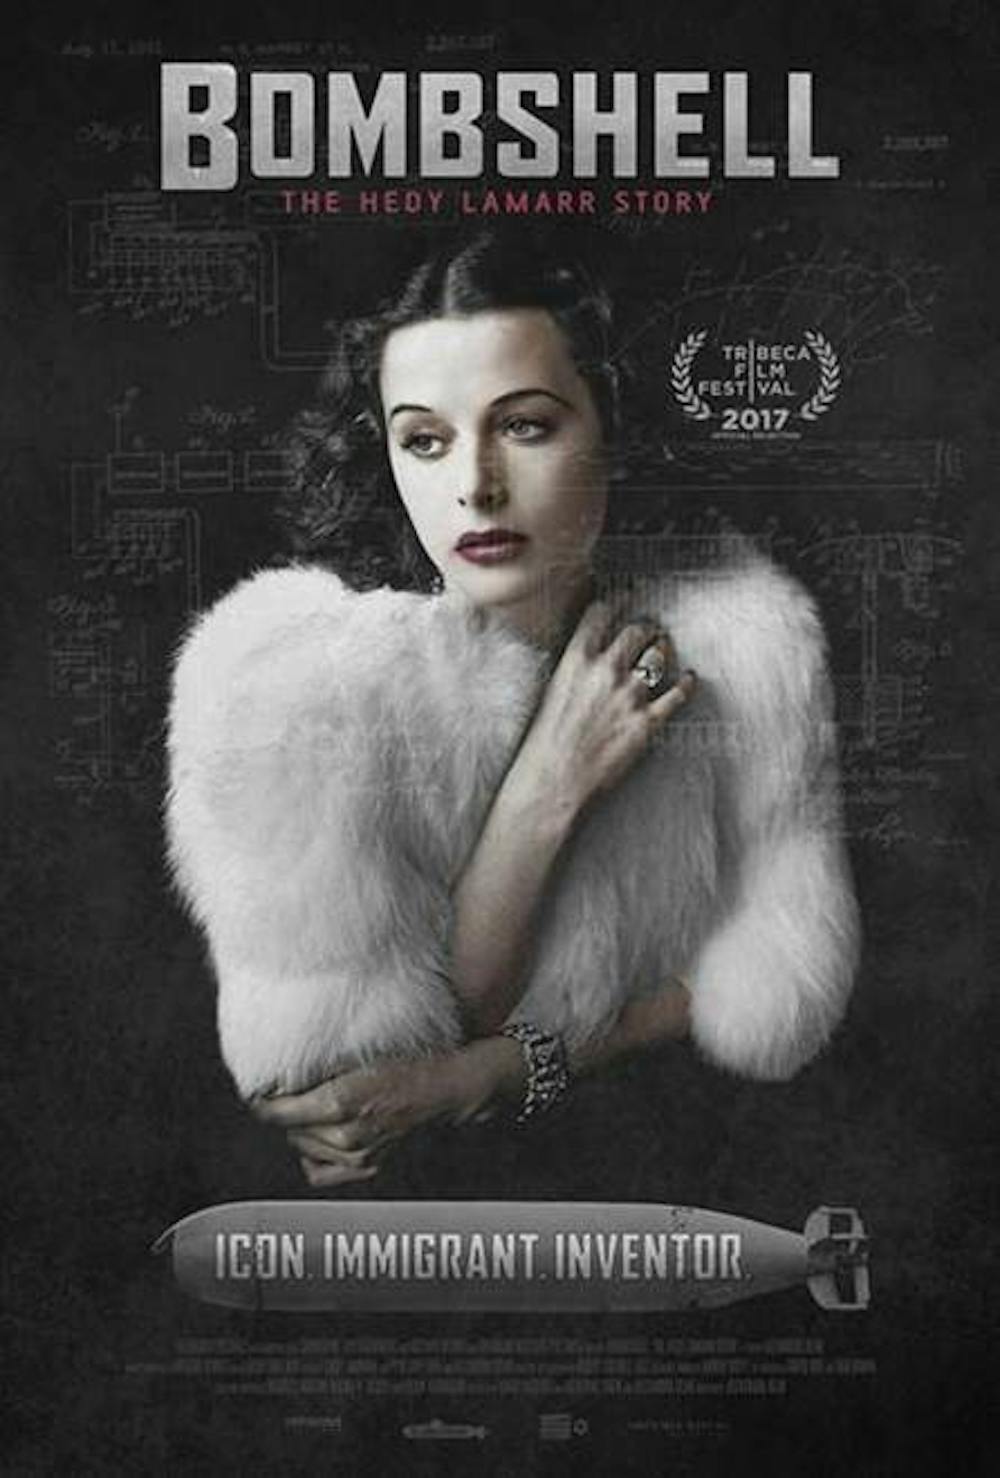 'Bombshell: The Hedy Lamarr Story' is a sobering documentary long overdue